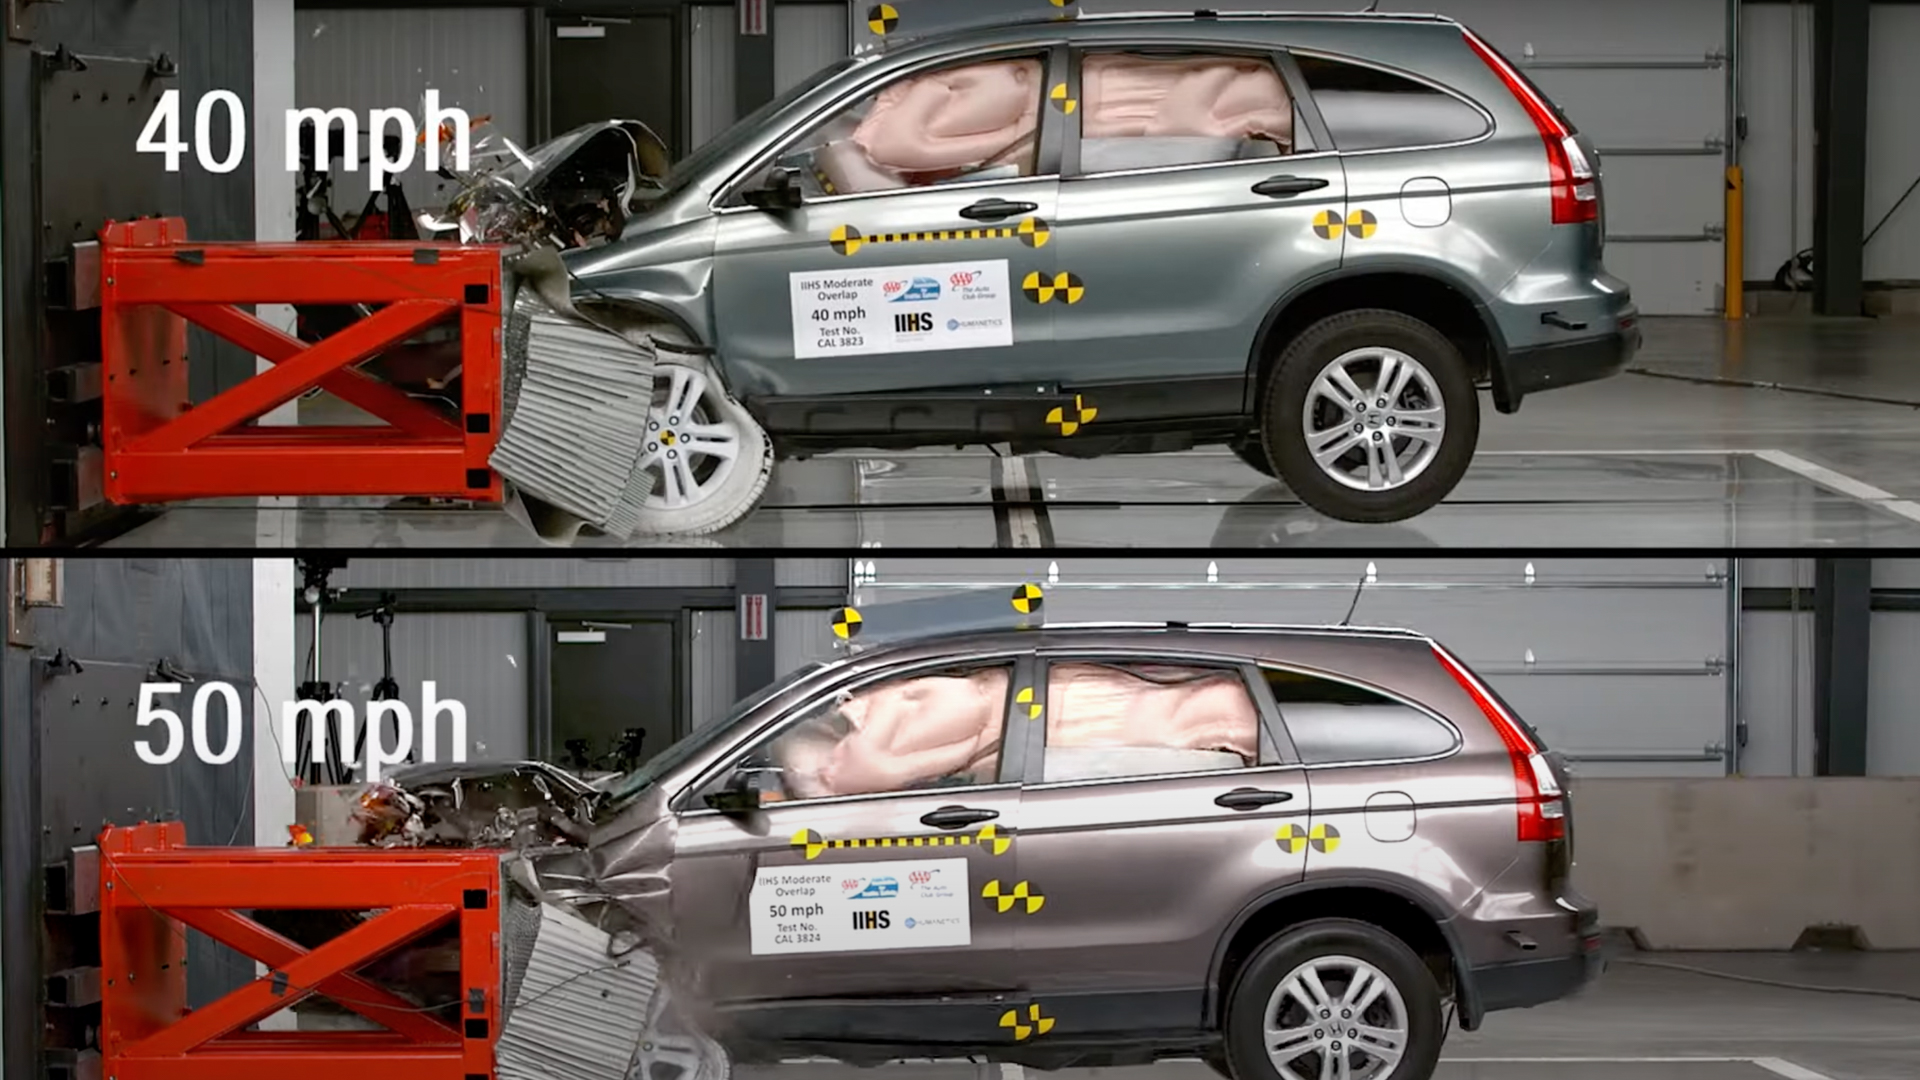 Why the IIHS Doesn’t Crash Test for Speeds Above 40 MPH